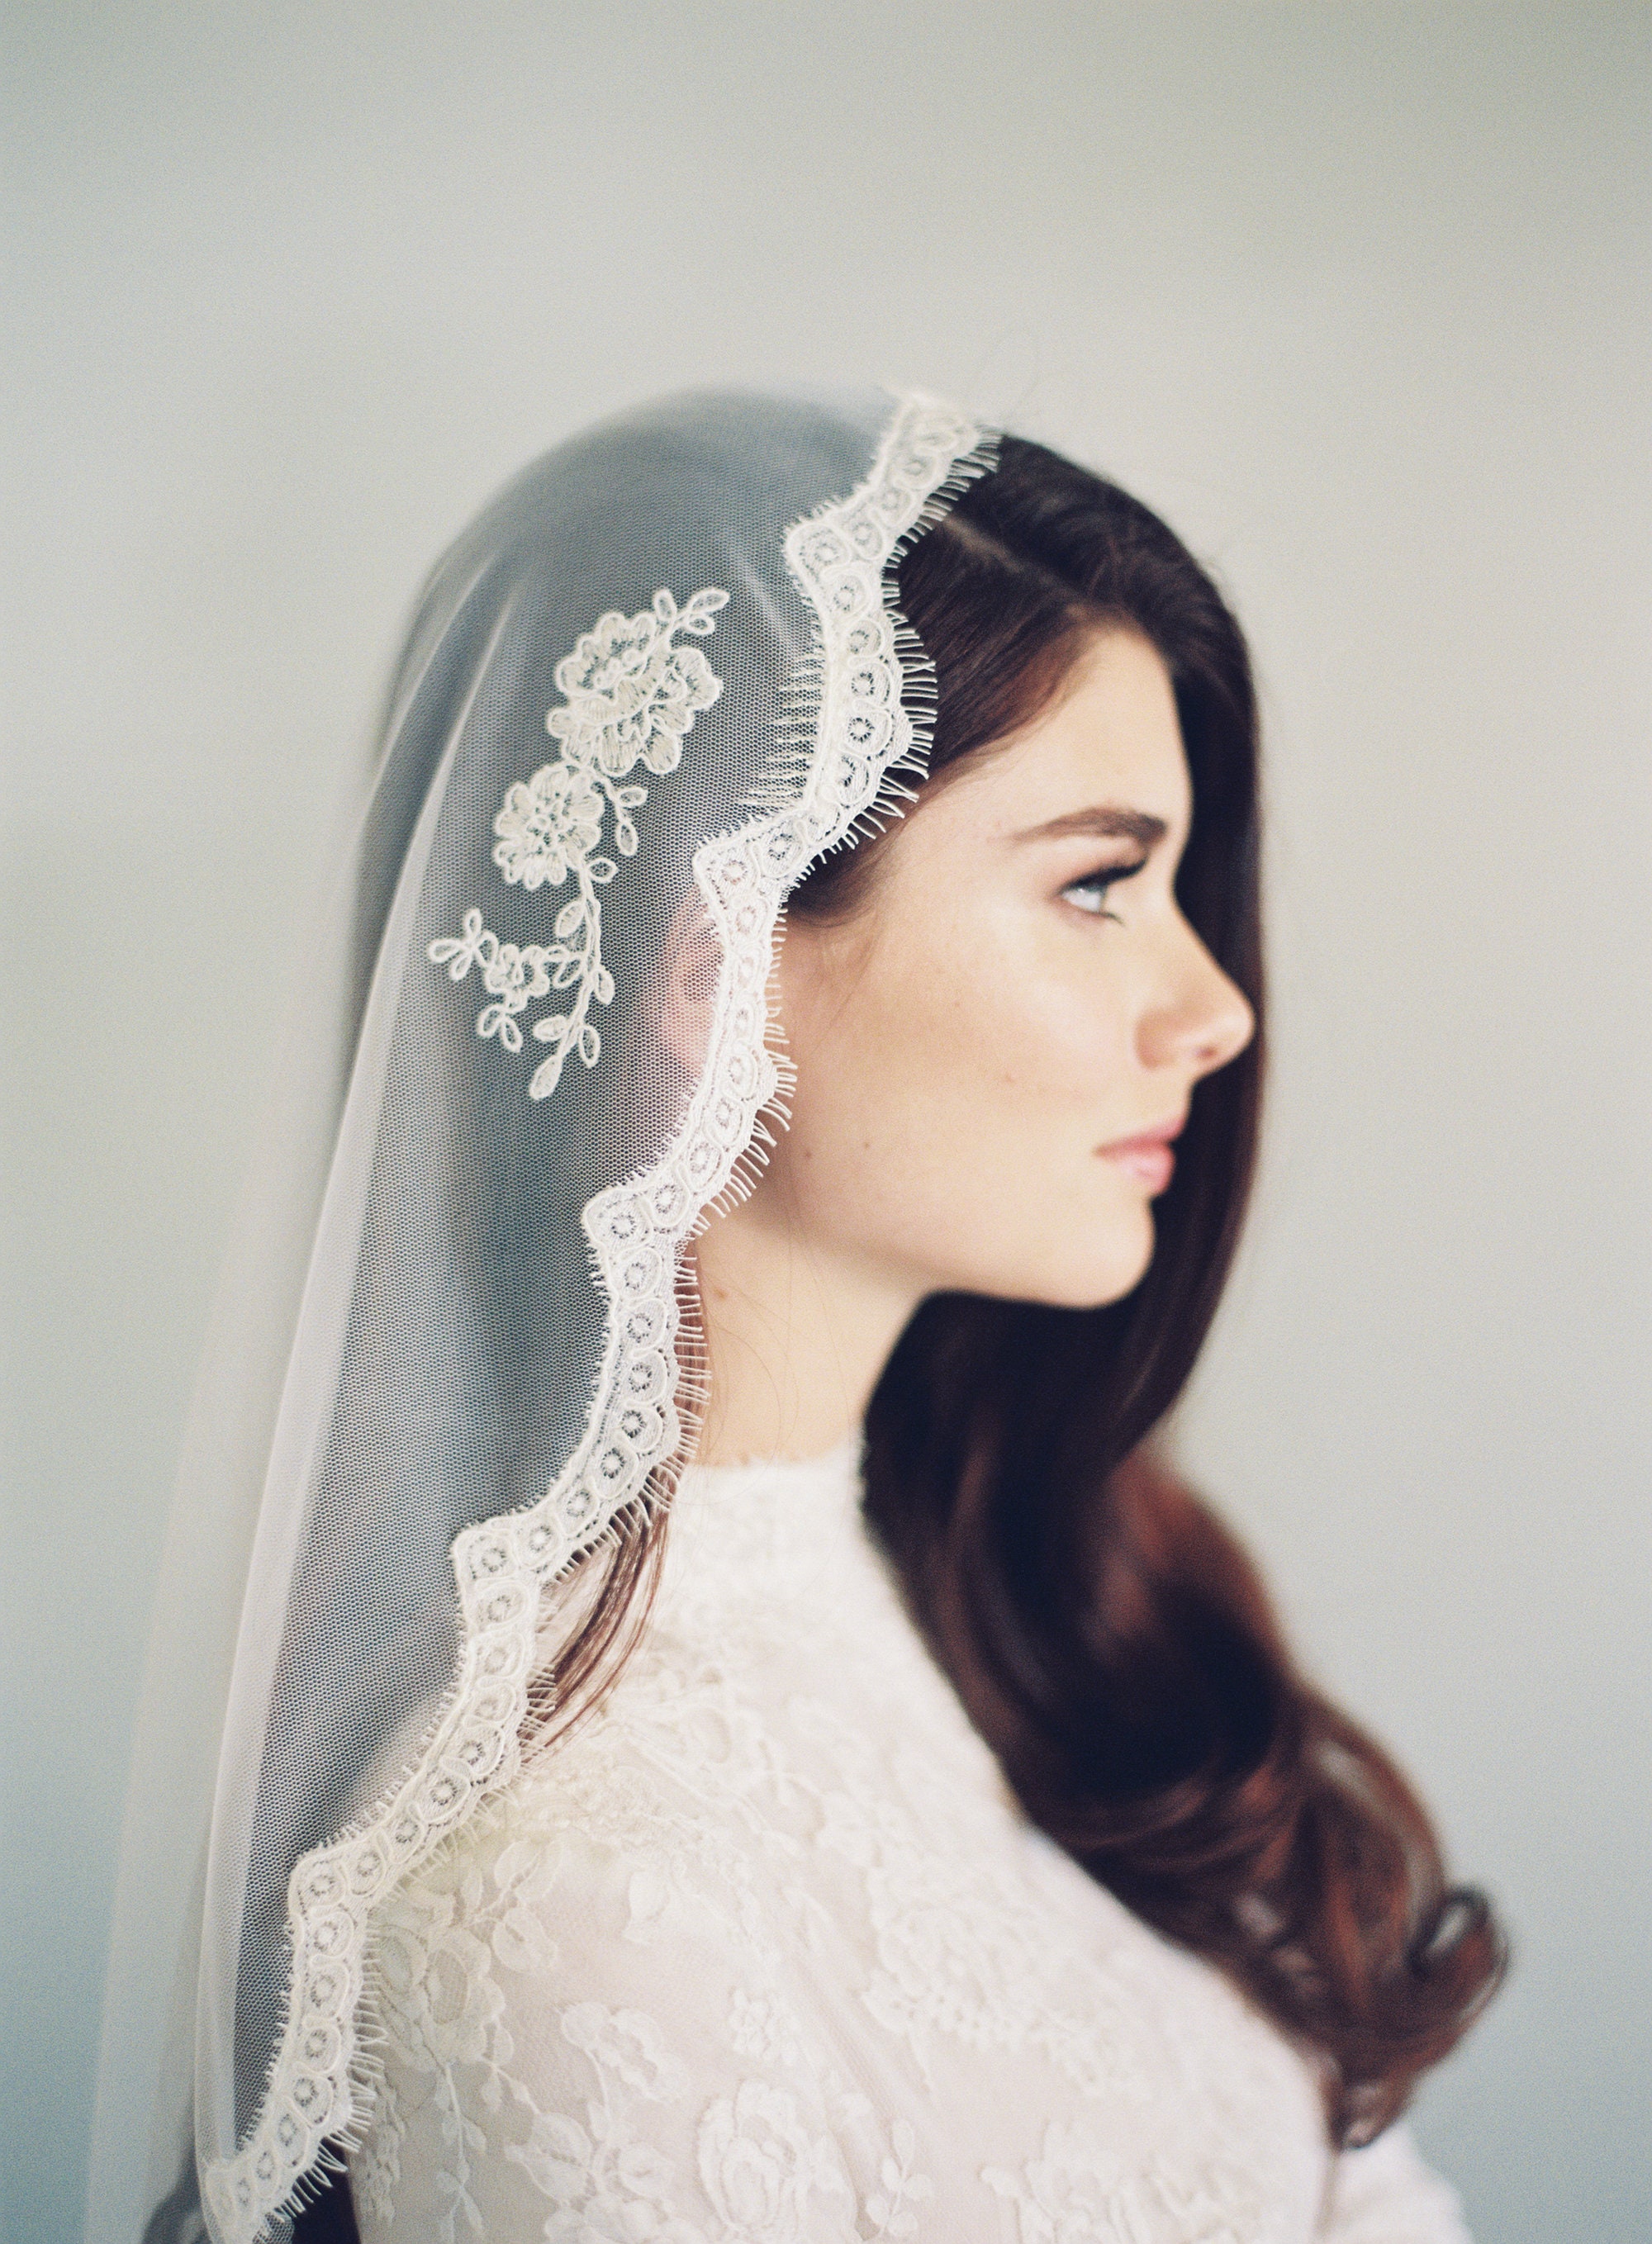 WEDDING CATHEDRAL LACE VEIL IN CHAMPAGNE SPANISH BRIDAL MANTILLA BEADED VEIL 